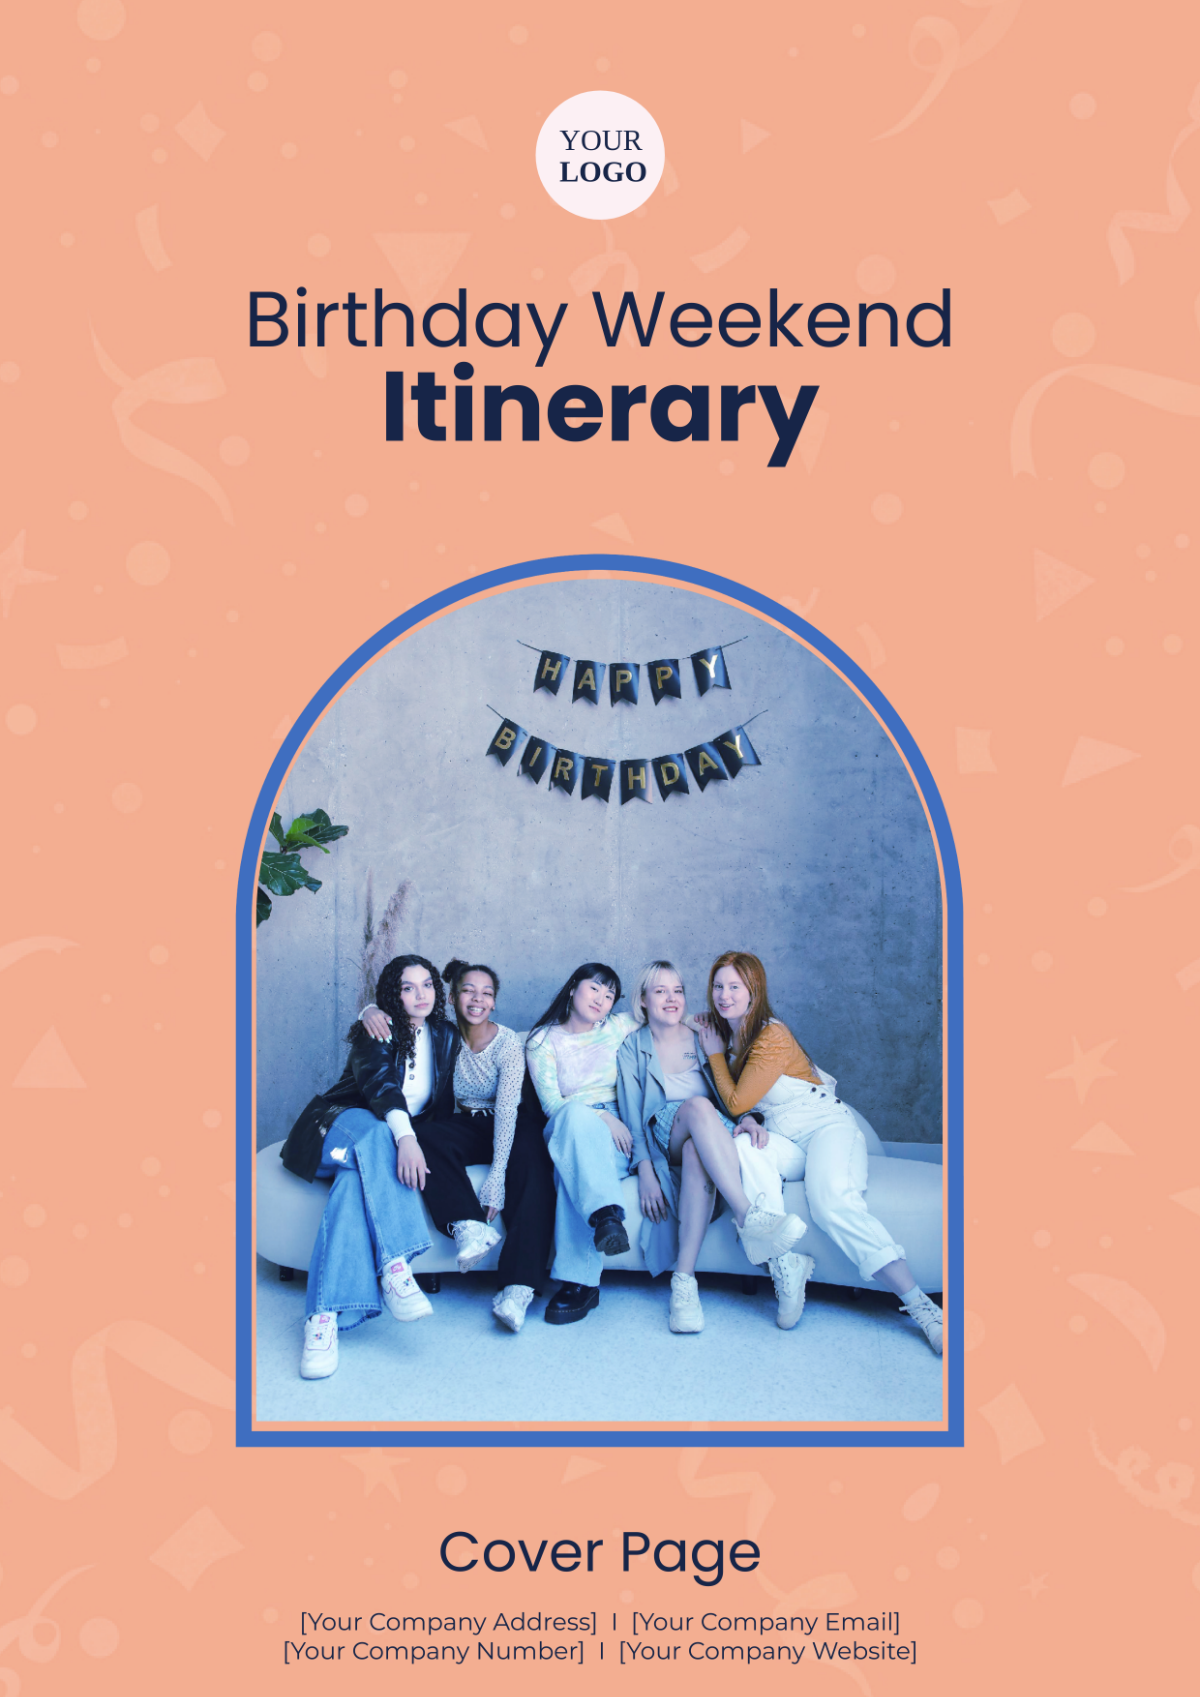 Birthday Weekend Itinerary Cover Page